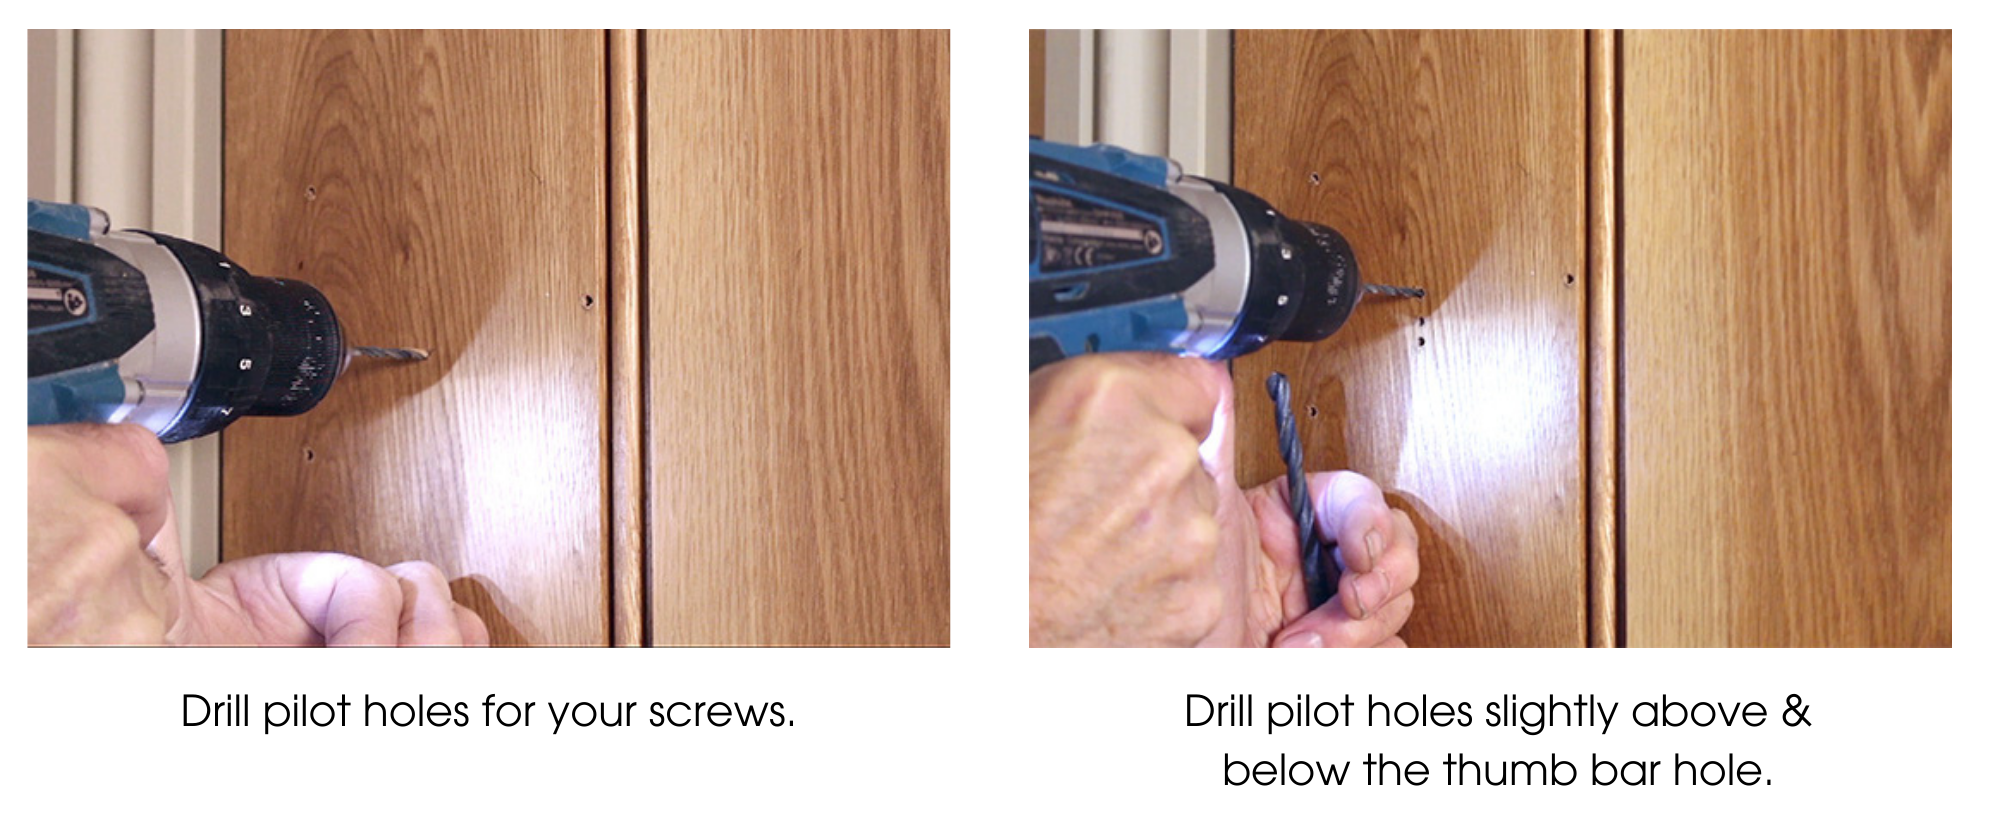 Person using an electric drill to drill pilot holes for screws to fit a thumblatch on a wooden ledge and brace door.